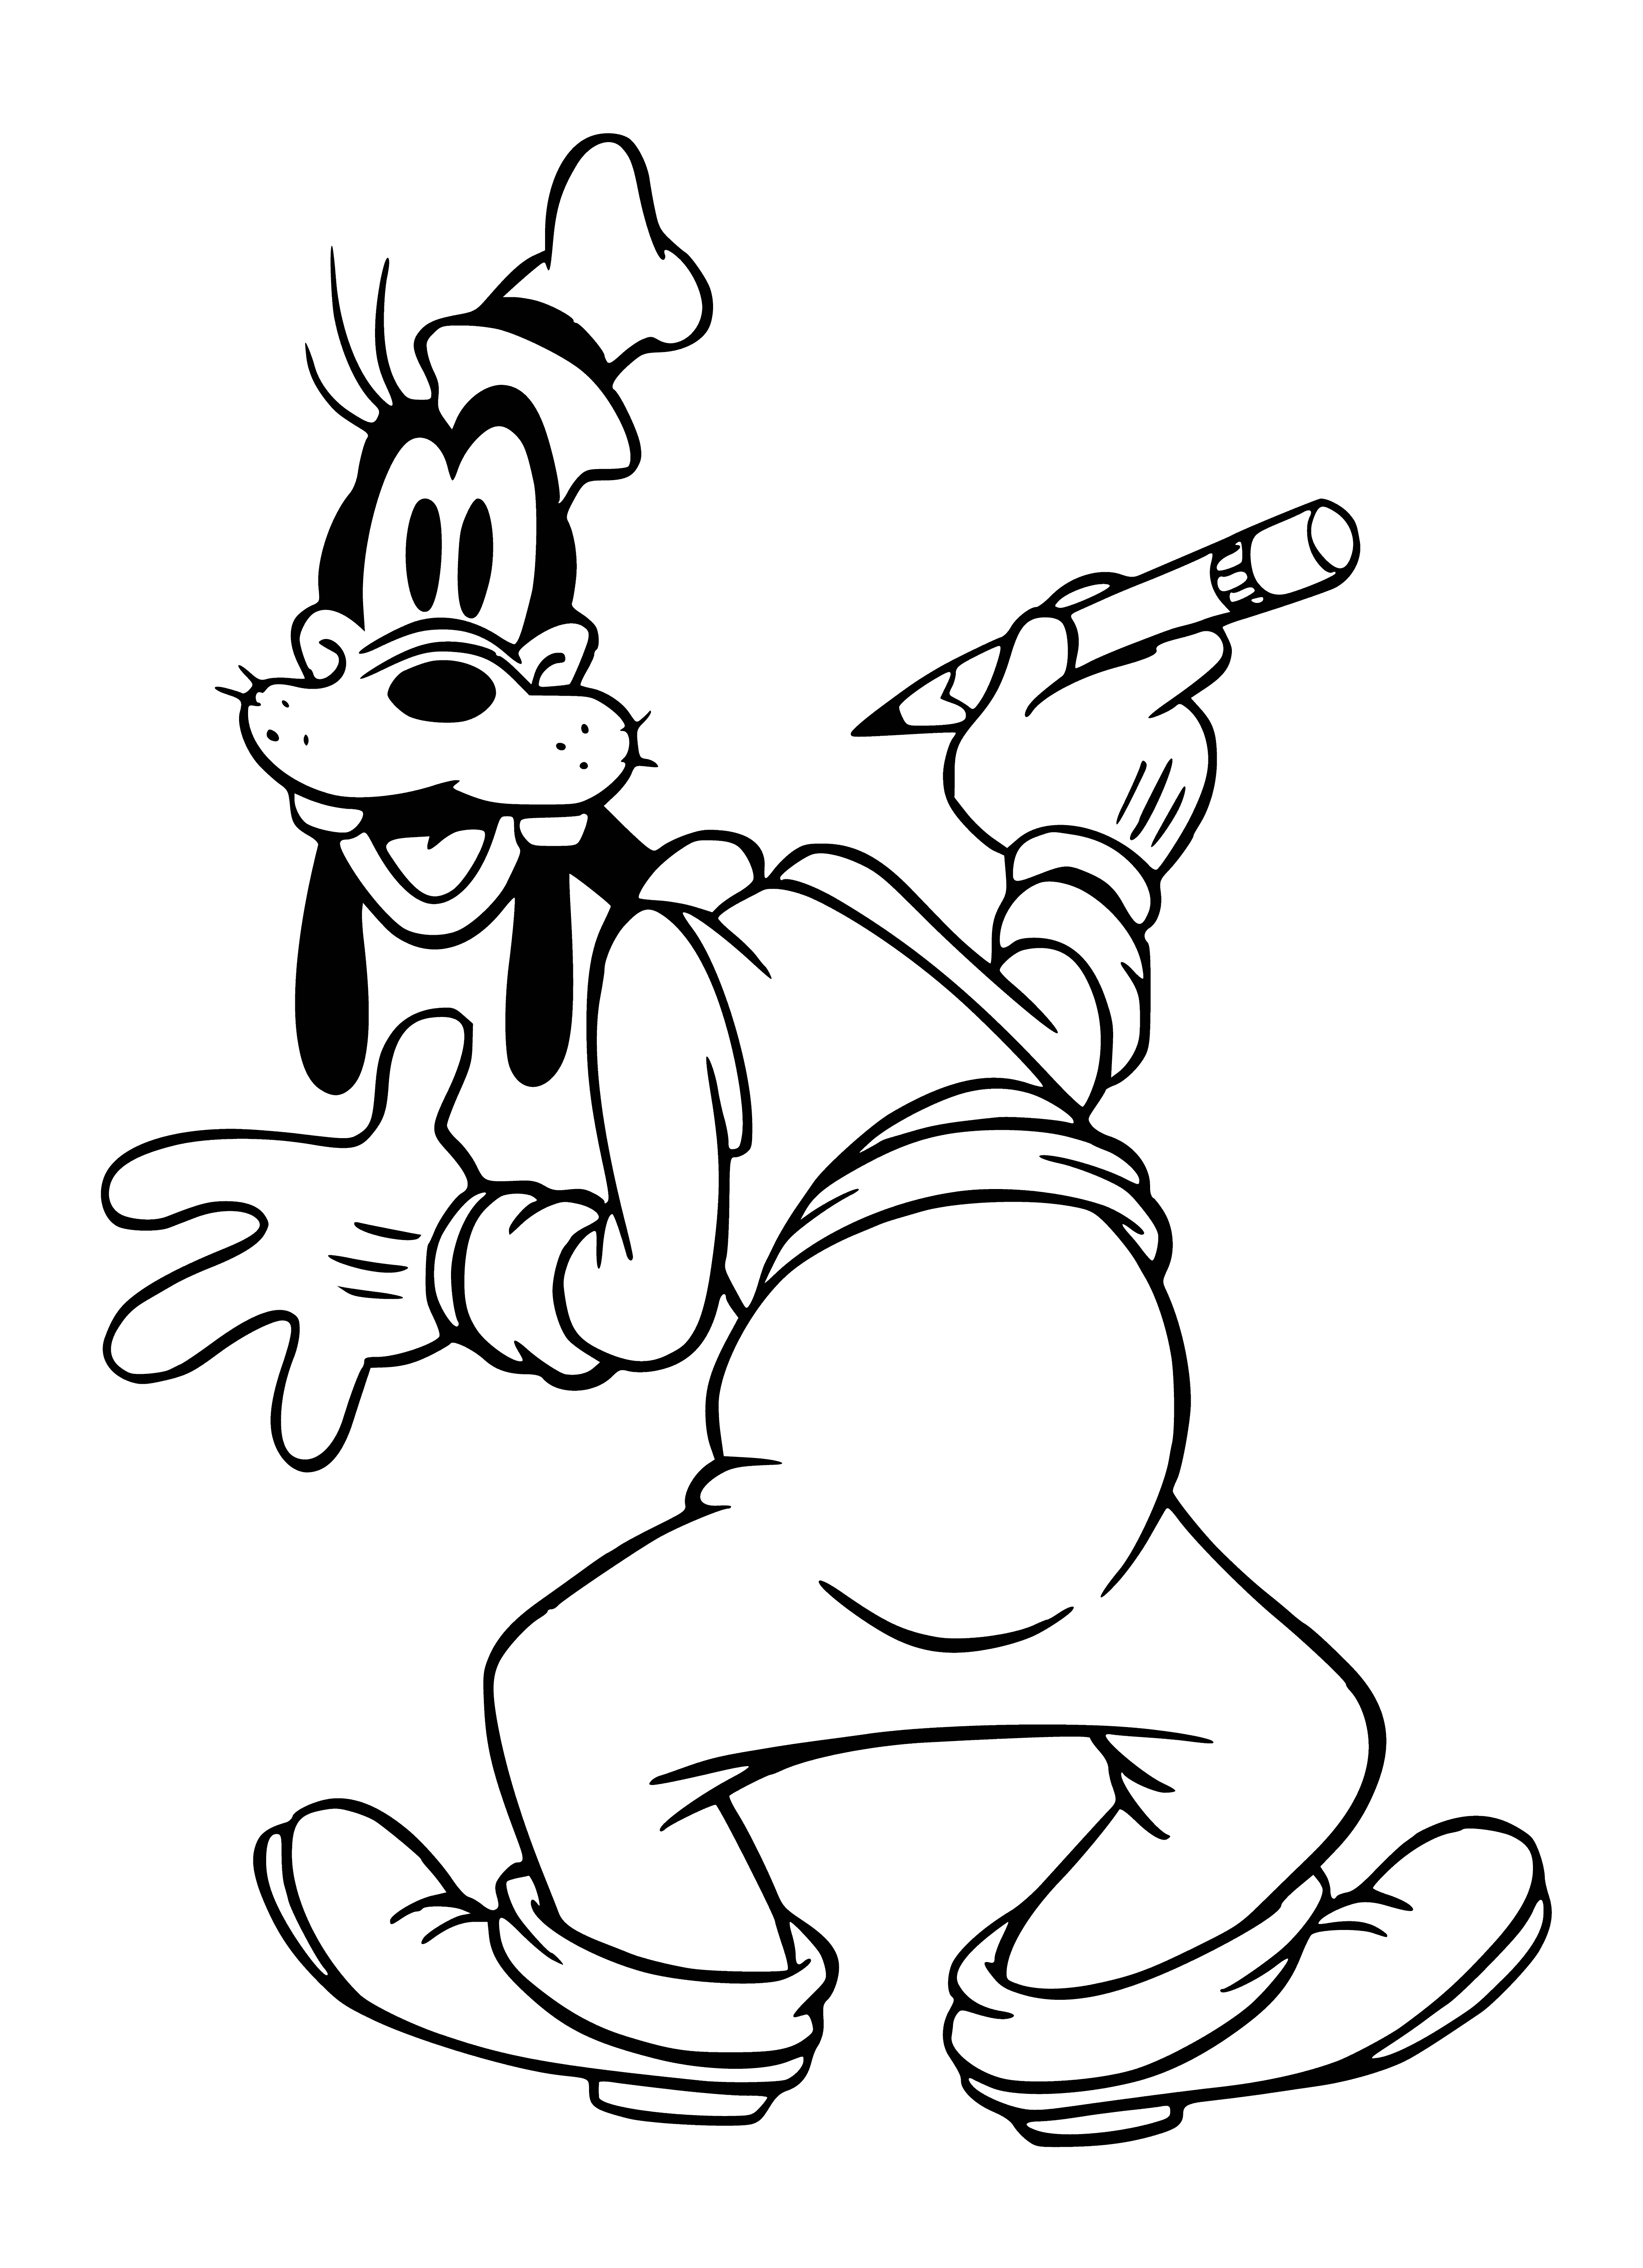 coloring page: Mickey Mouse creates art by making a goopy mess, holding a paintbrush & palette, and leaving two footprints.